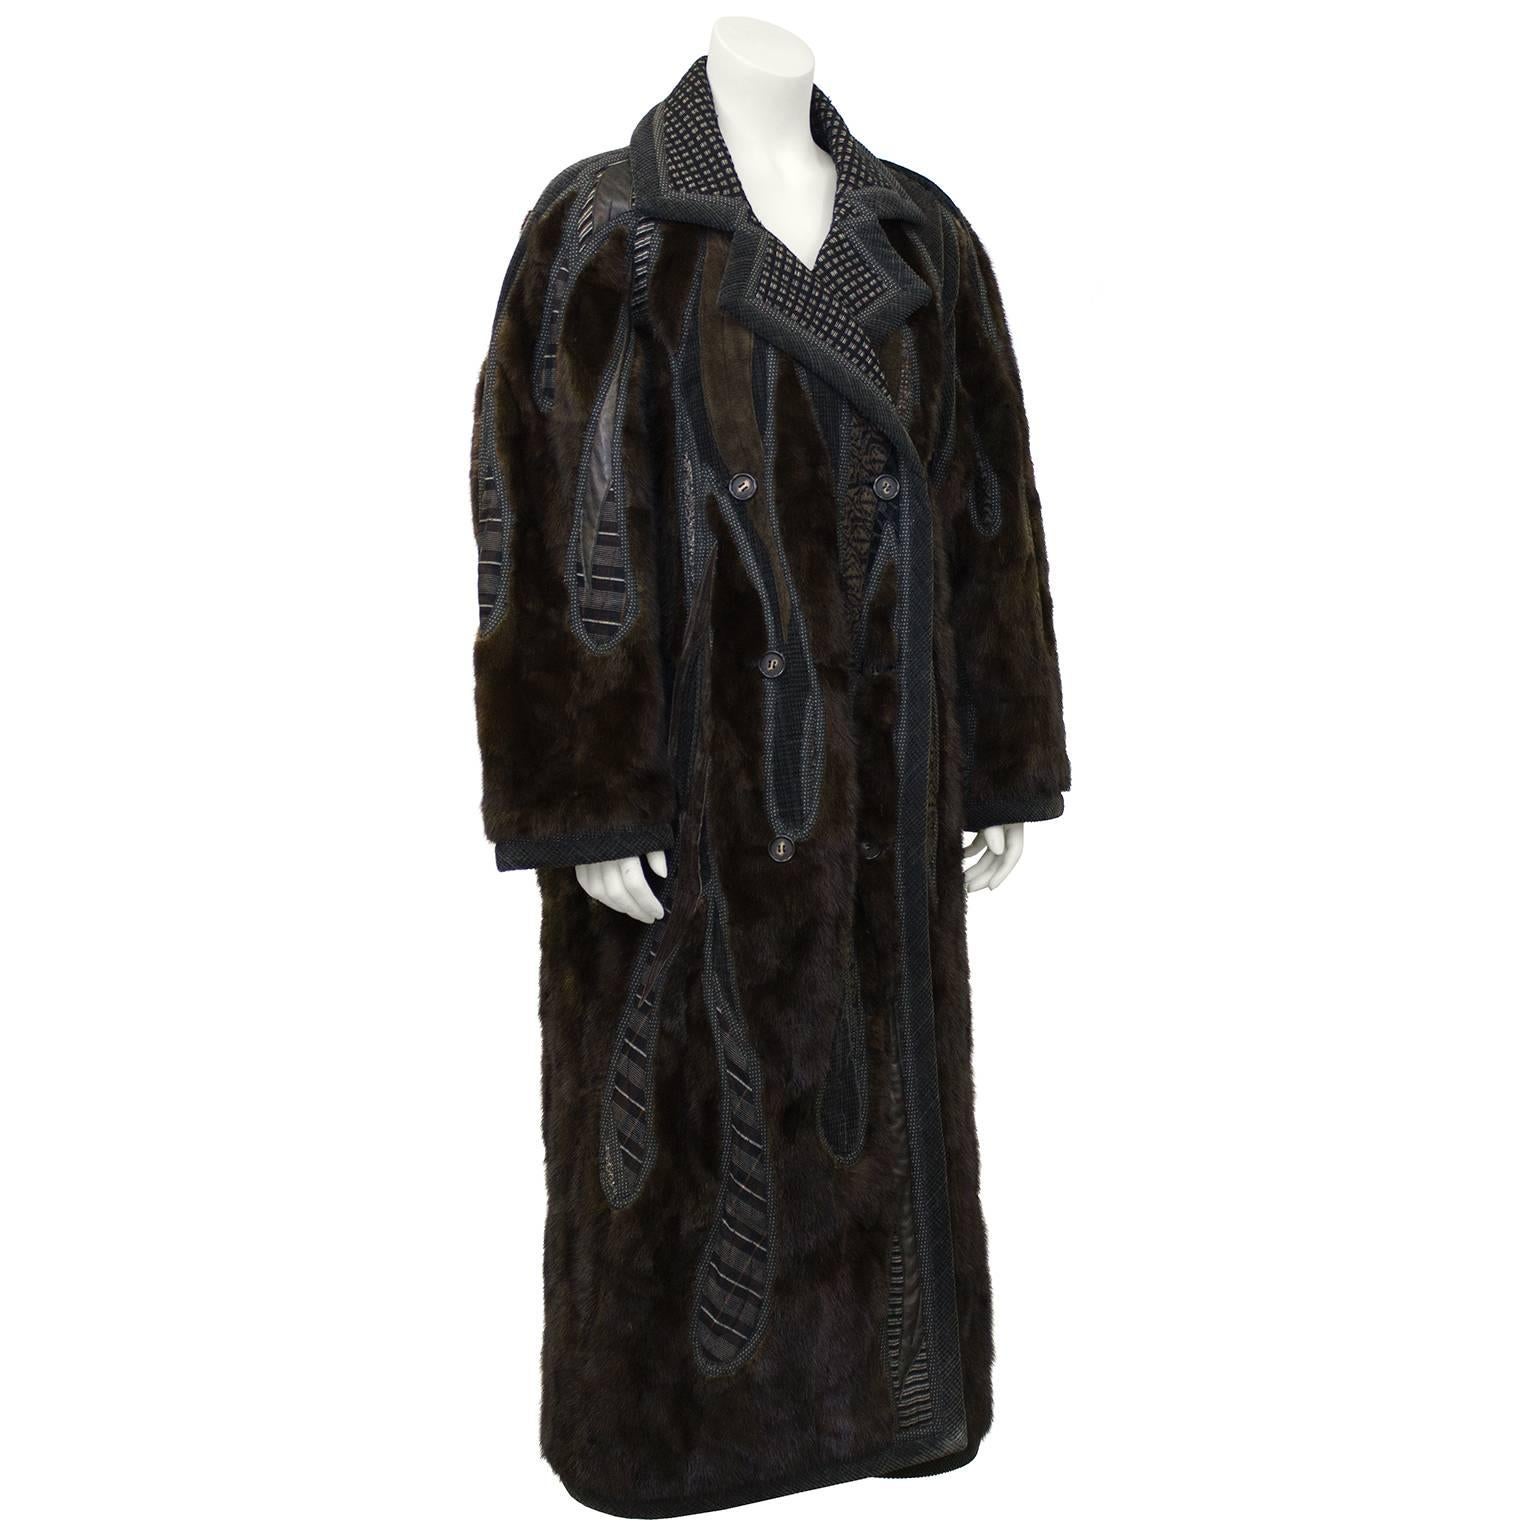 1990's unique wearable art by Koos Van Den Akker Couture. Winter weight, double breasted, drop shoulder Chesterfield shape with hand designed patchwork inserts of deep brown mink, black and cream wool checked fabric, brown leather and suede along